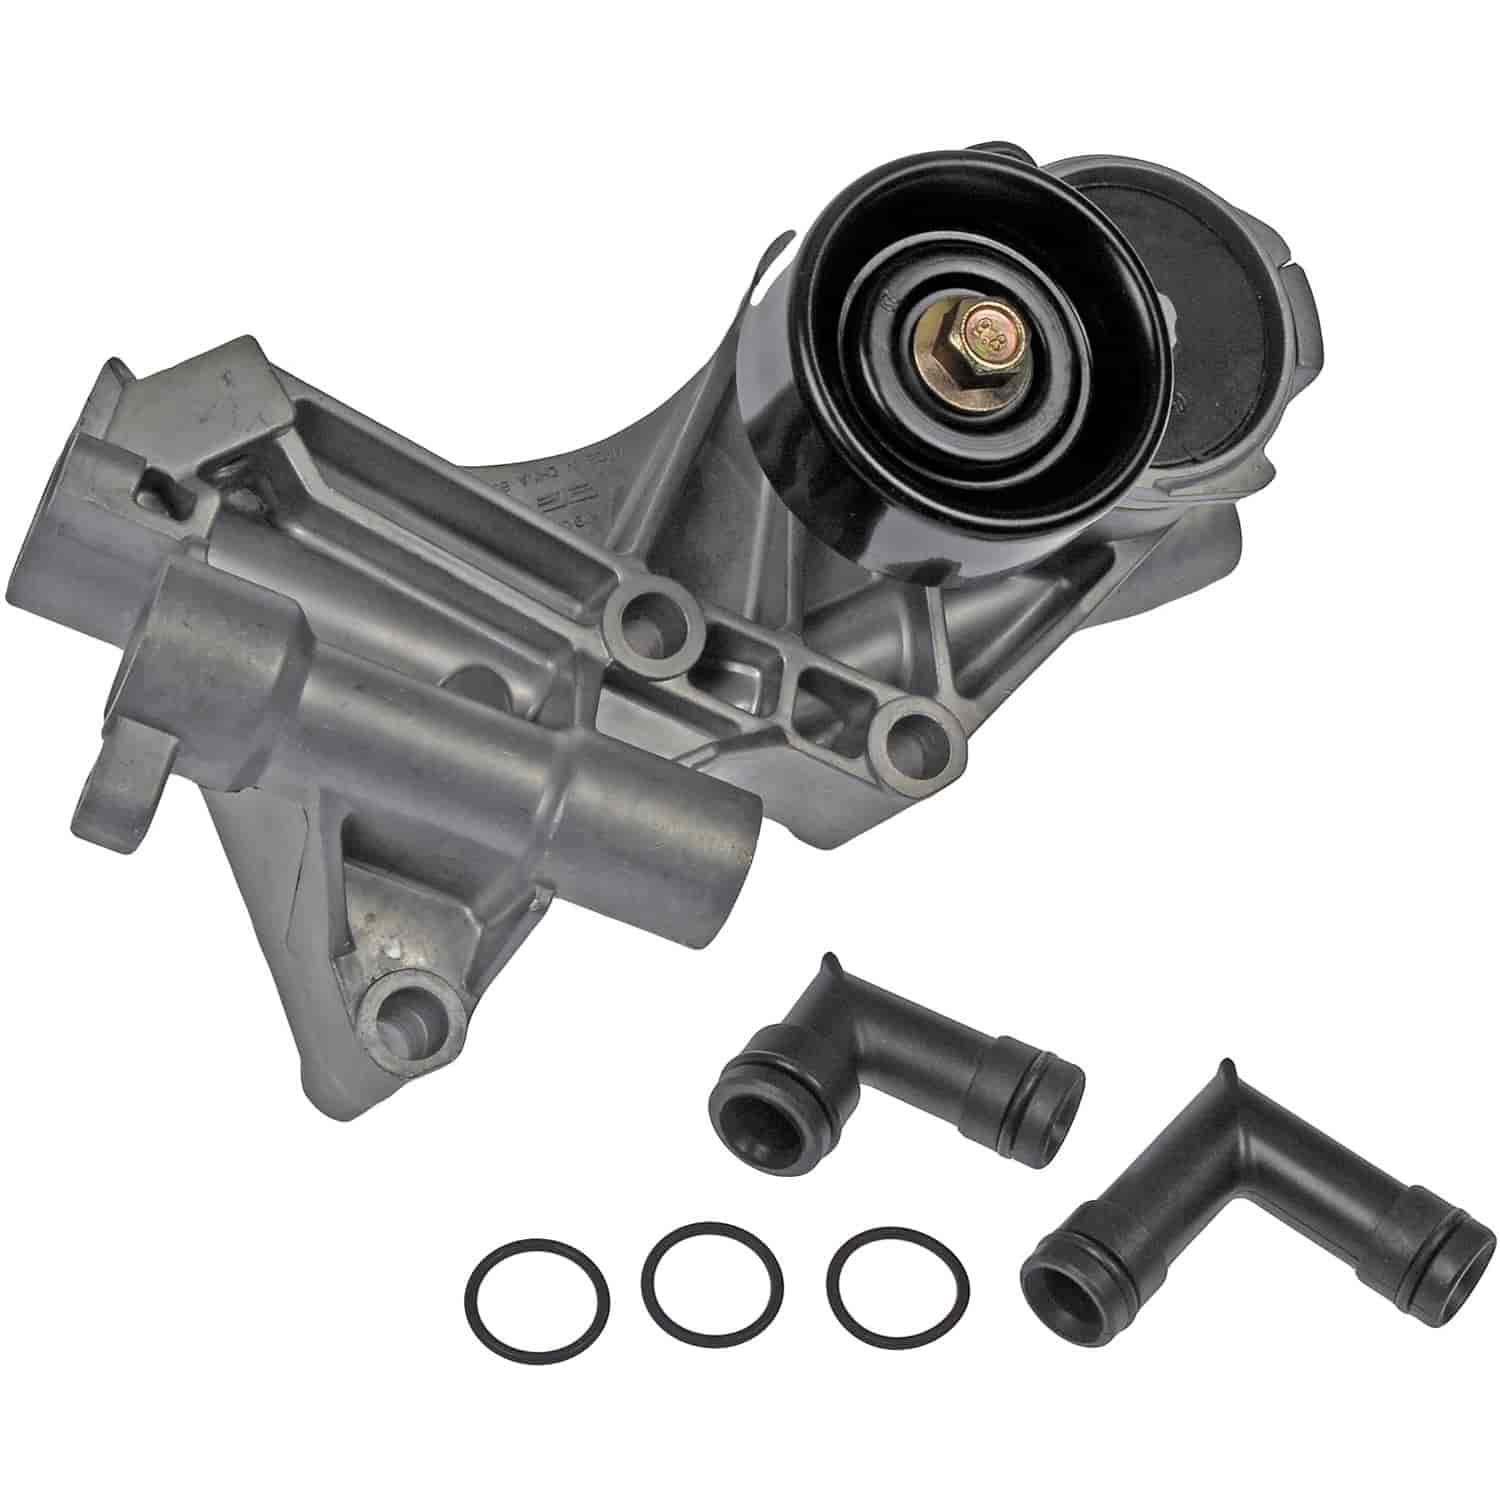 Automatic Belt Tensioner 1999-2008 Pontiac, 1999-2009 Buick, 2000-2005 Chevy